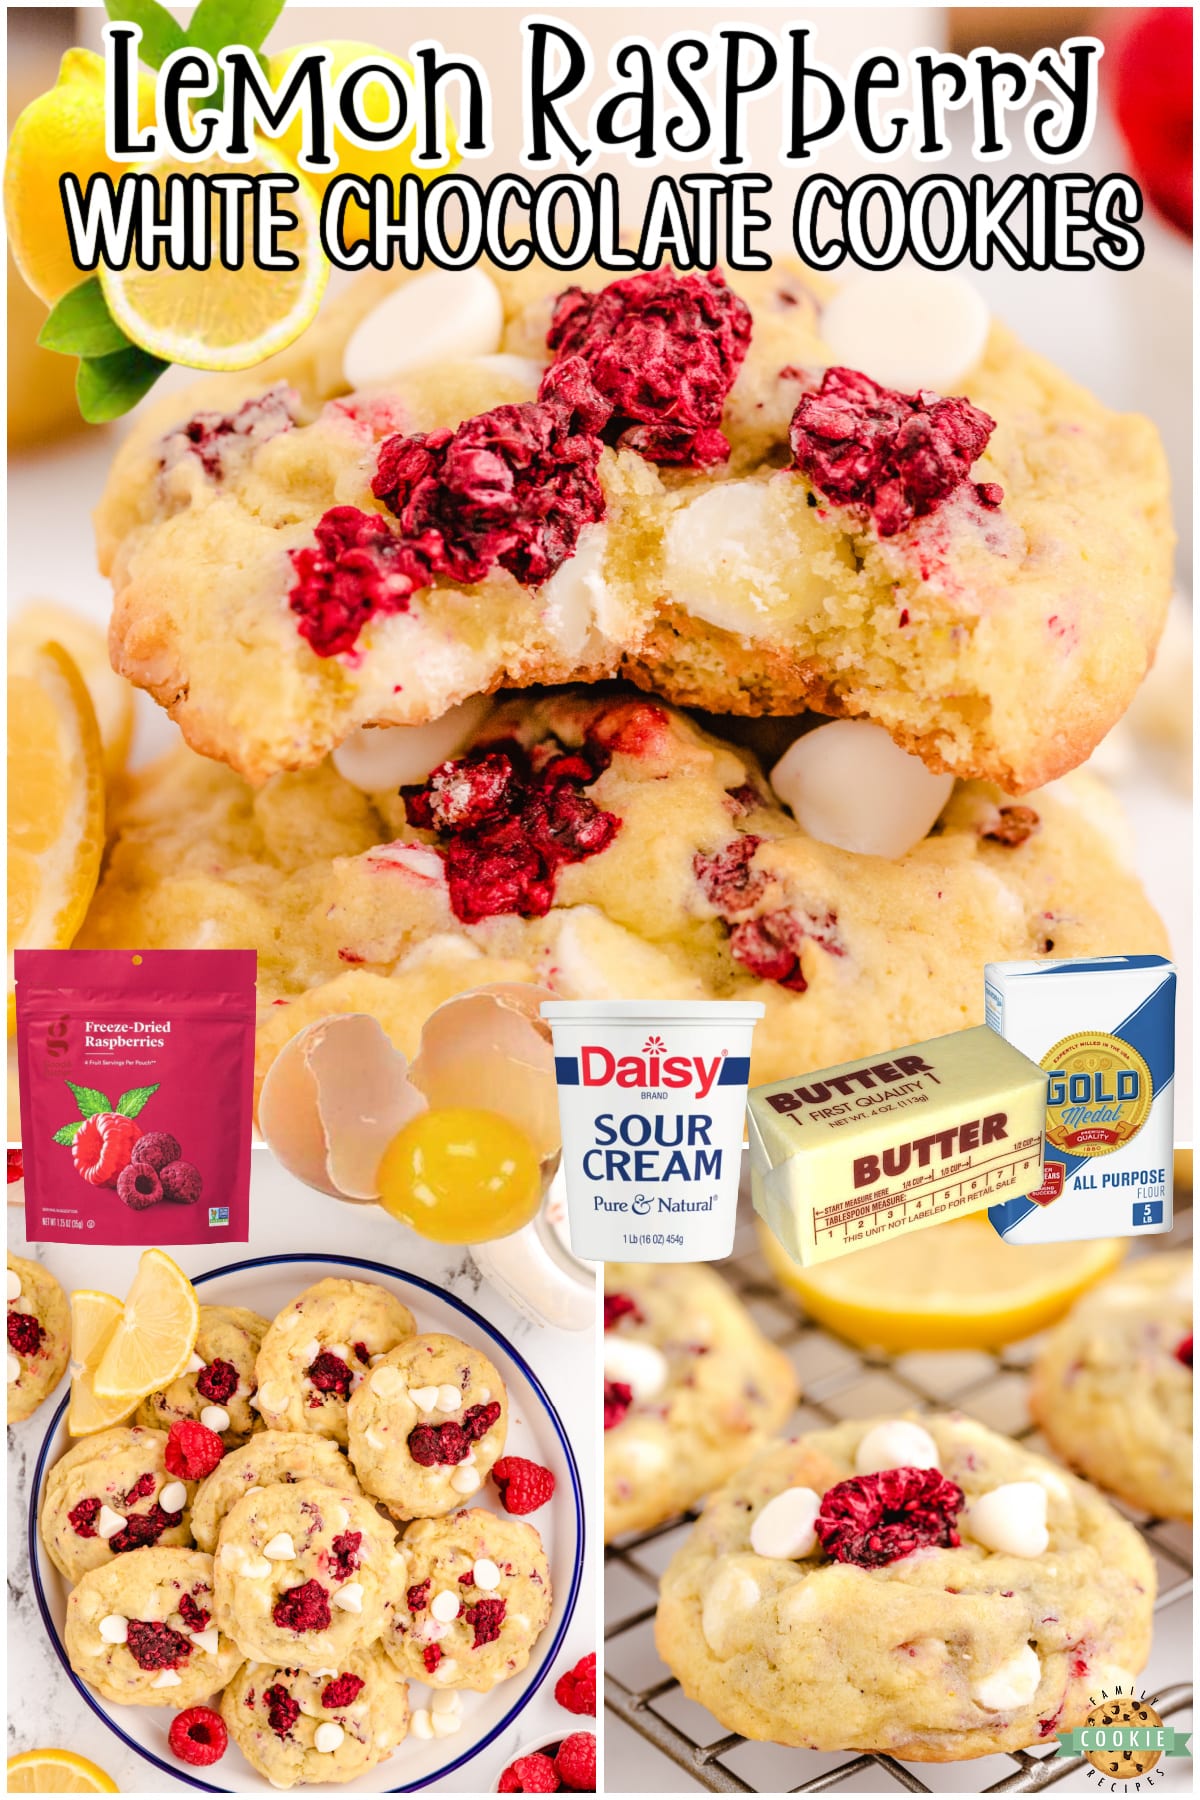 Lemon Raspberry Cookies are soft, chewy cookies made with lemon pudding mix & raspberries! Great flavor and texture to this lemon raspberry cookie with white chocolate chips.